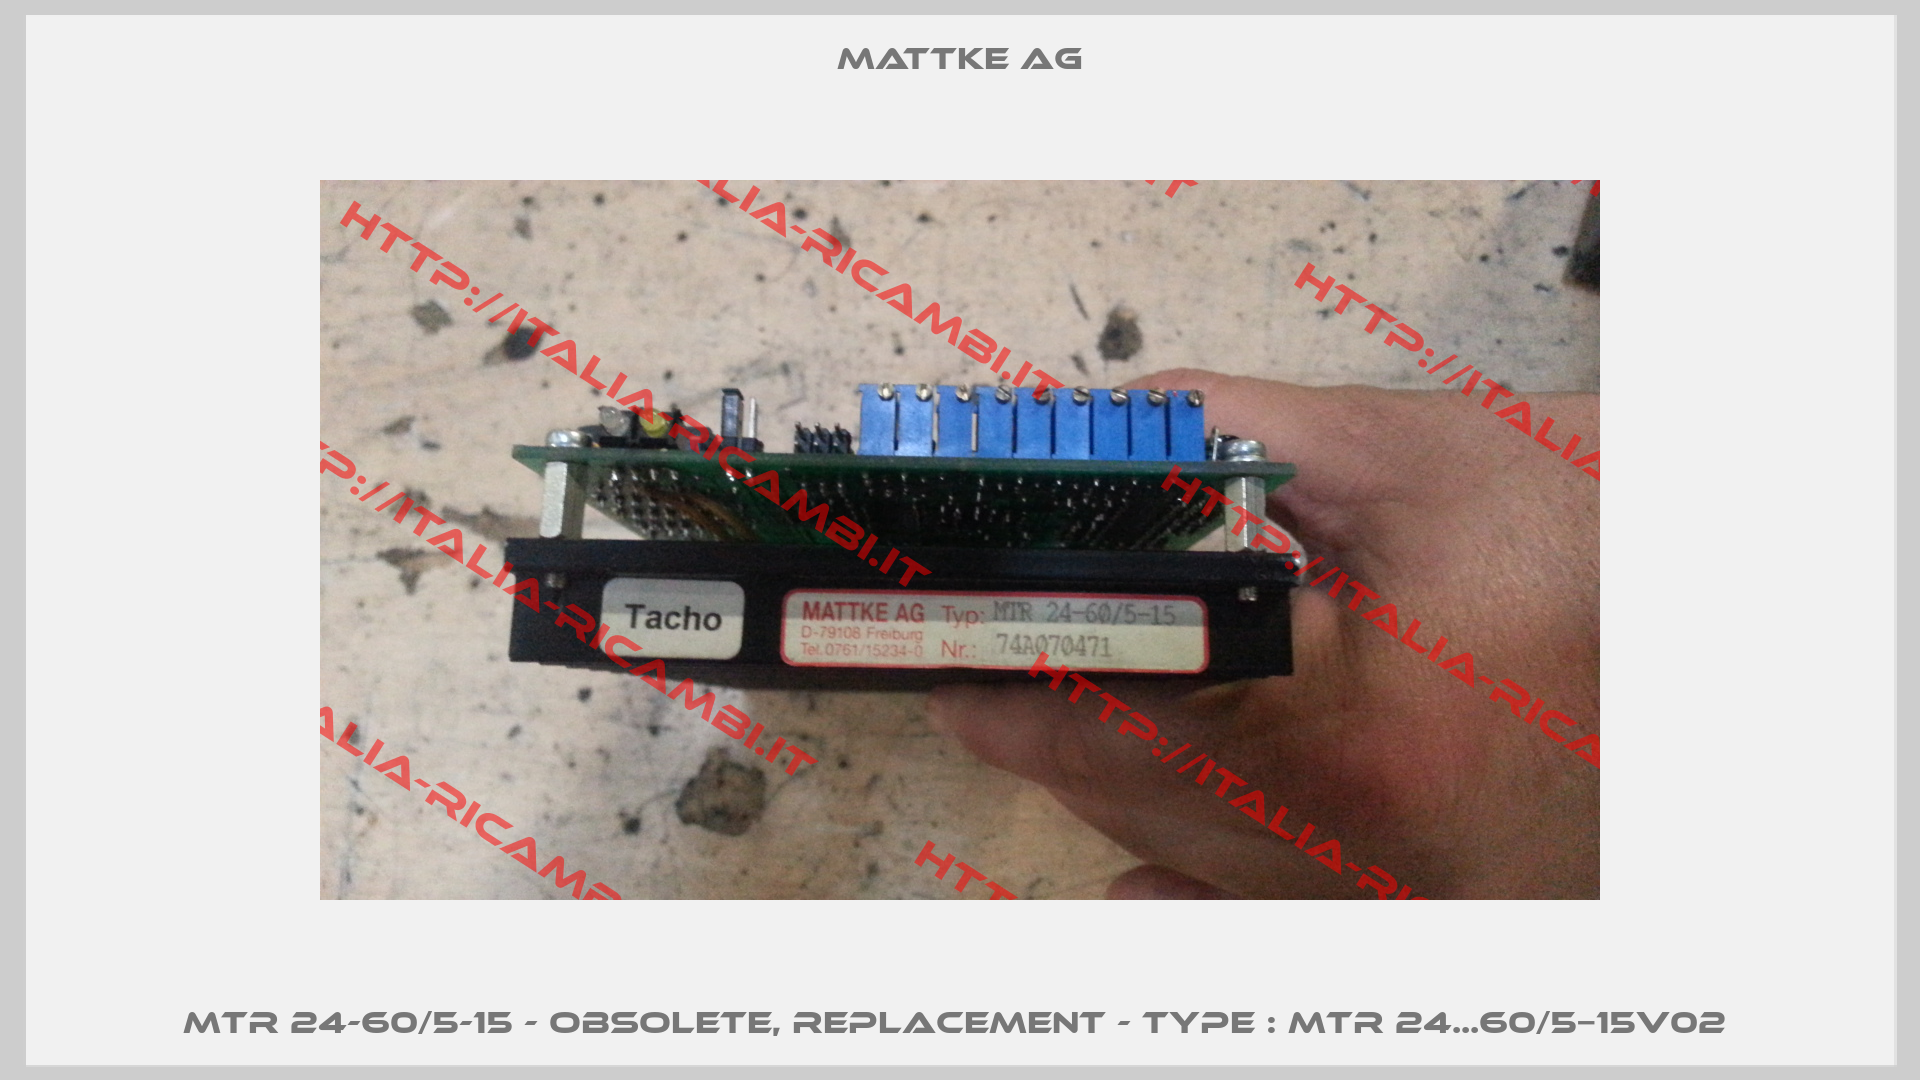 MTR 24-60/5-15 - obsolete, replacement - Type : MTR 24...60/5−15V02 -1